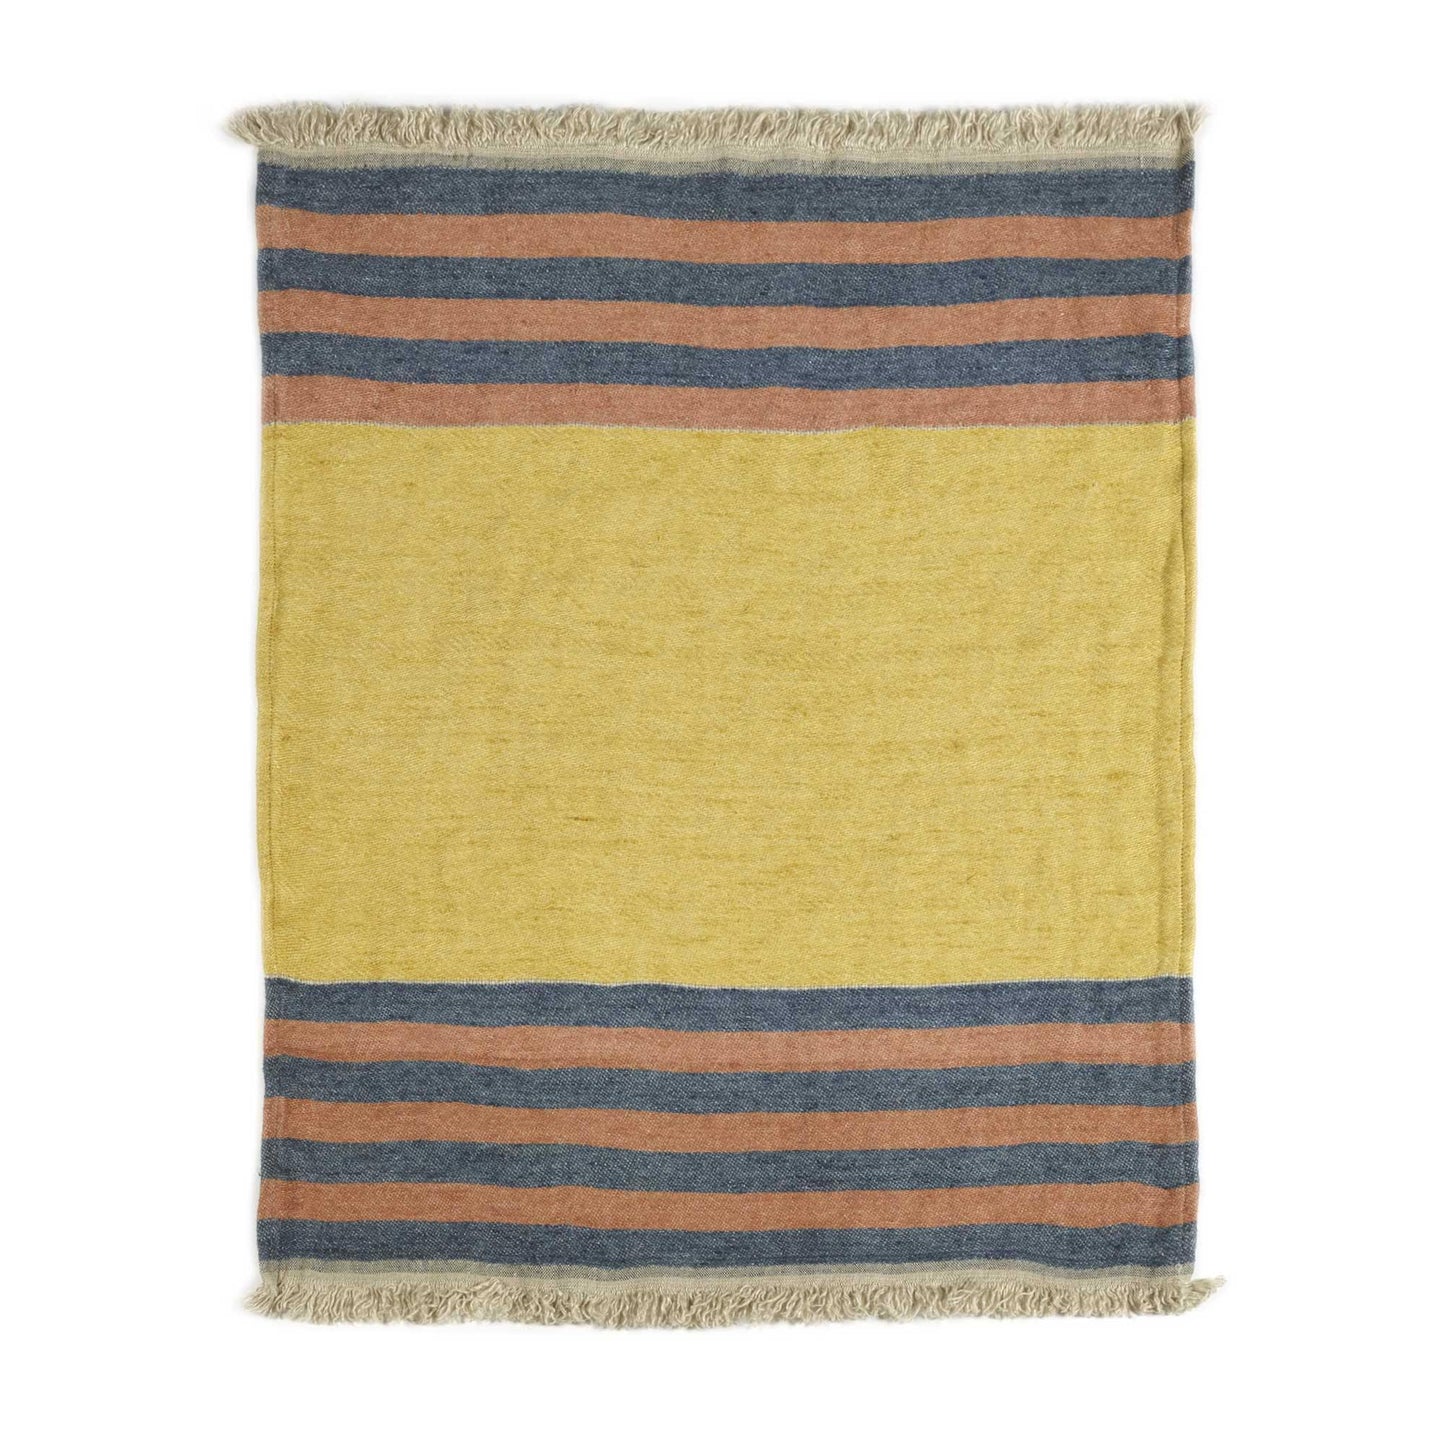 Belgian linen fouta throw blanket flat lay product shot in color Red Earth by Libeco for South Hous.